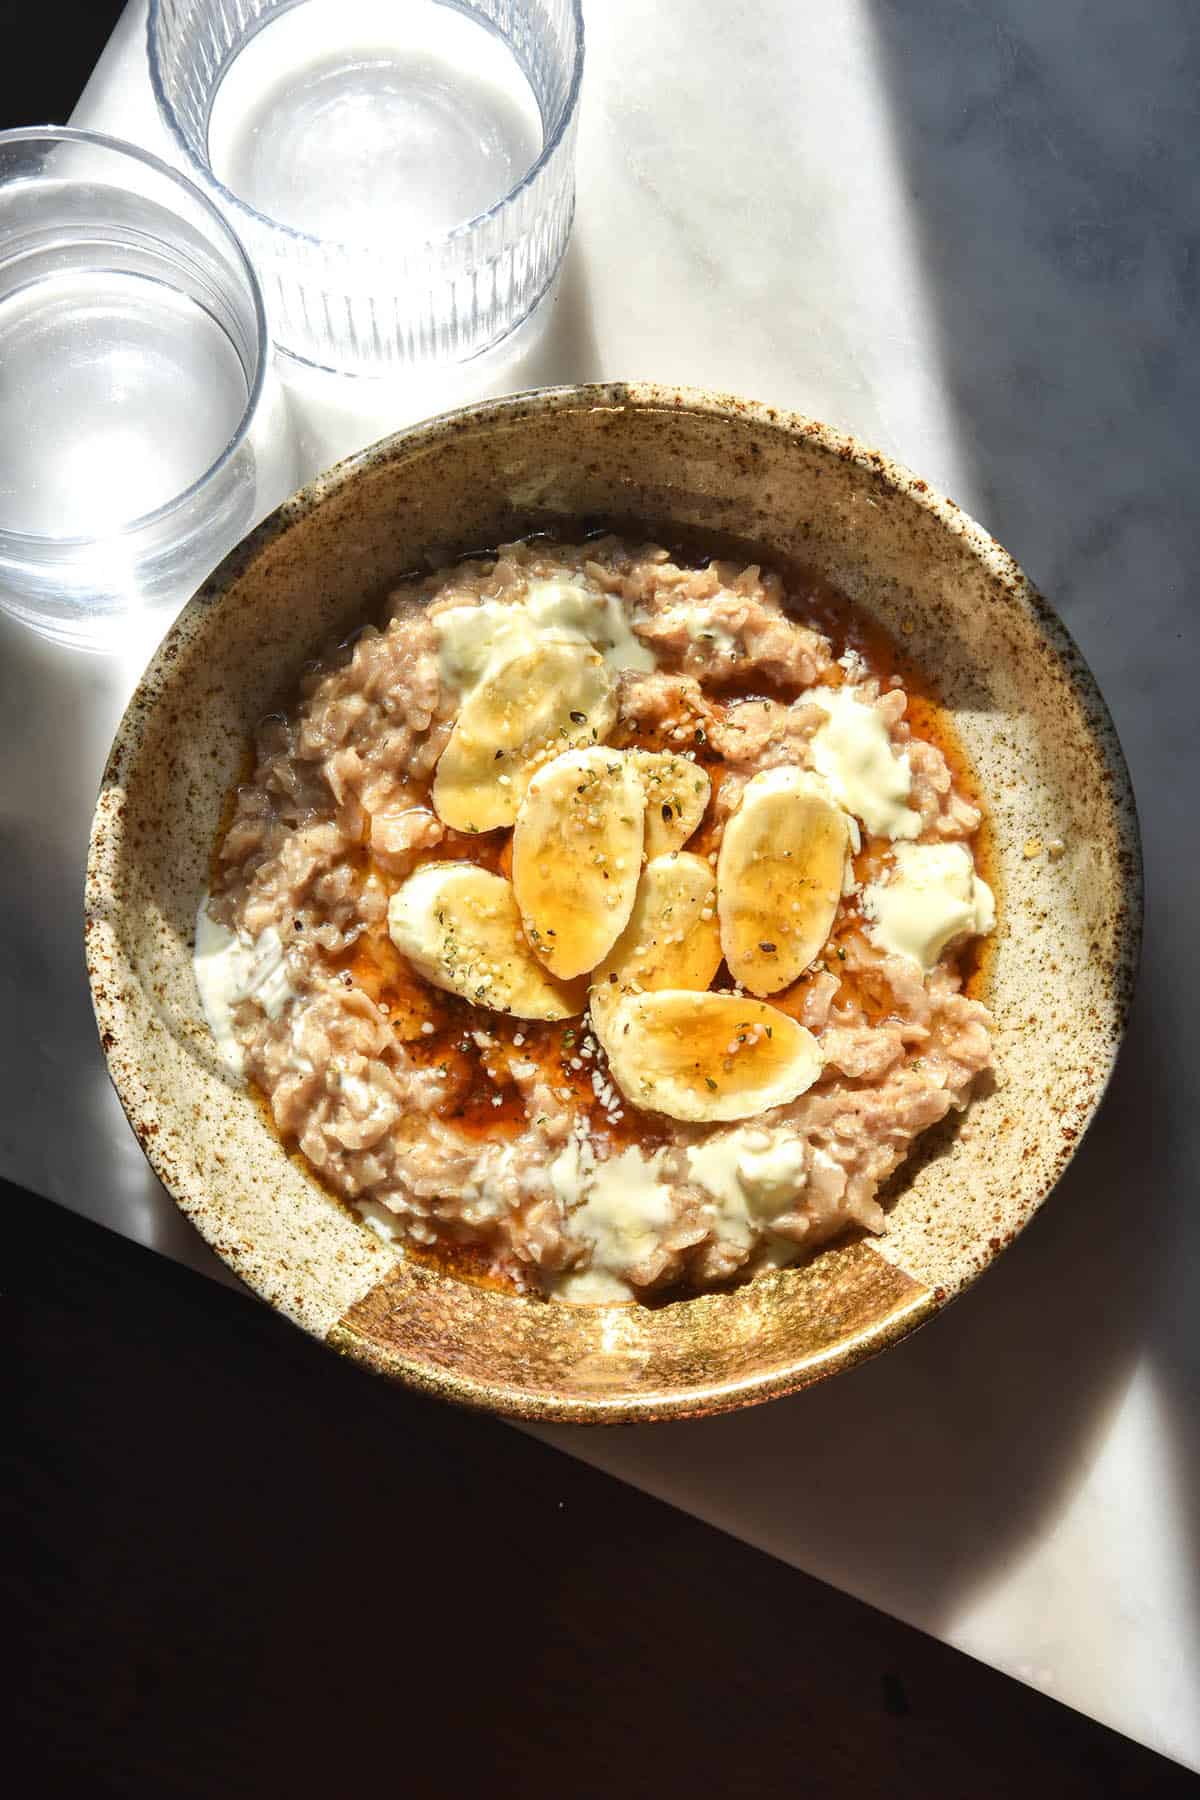 An aerial sunlit image of a bowl of gluten free porridge topped with bananas, maple syrup and yoghurt